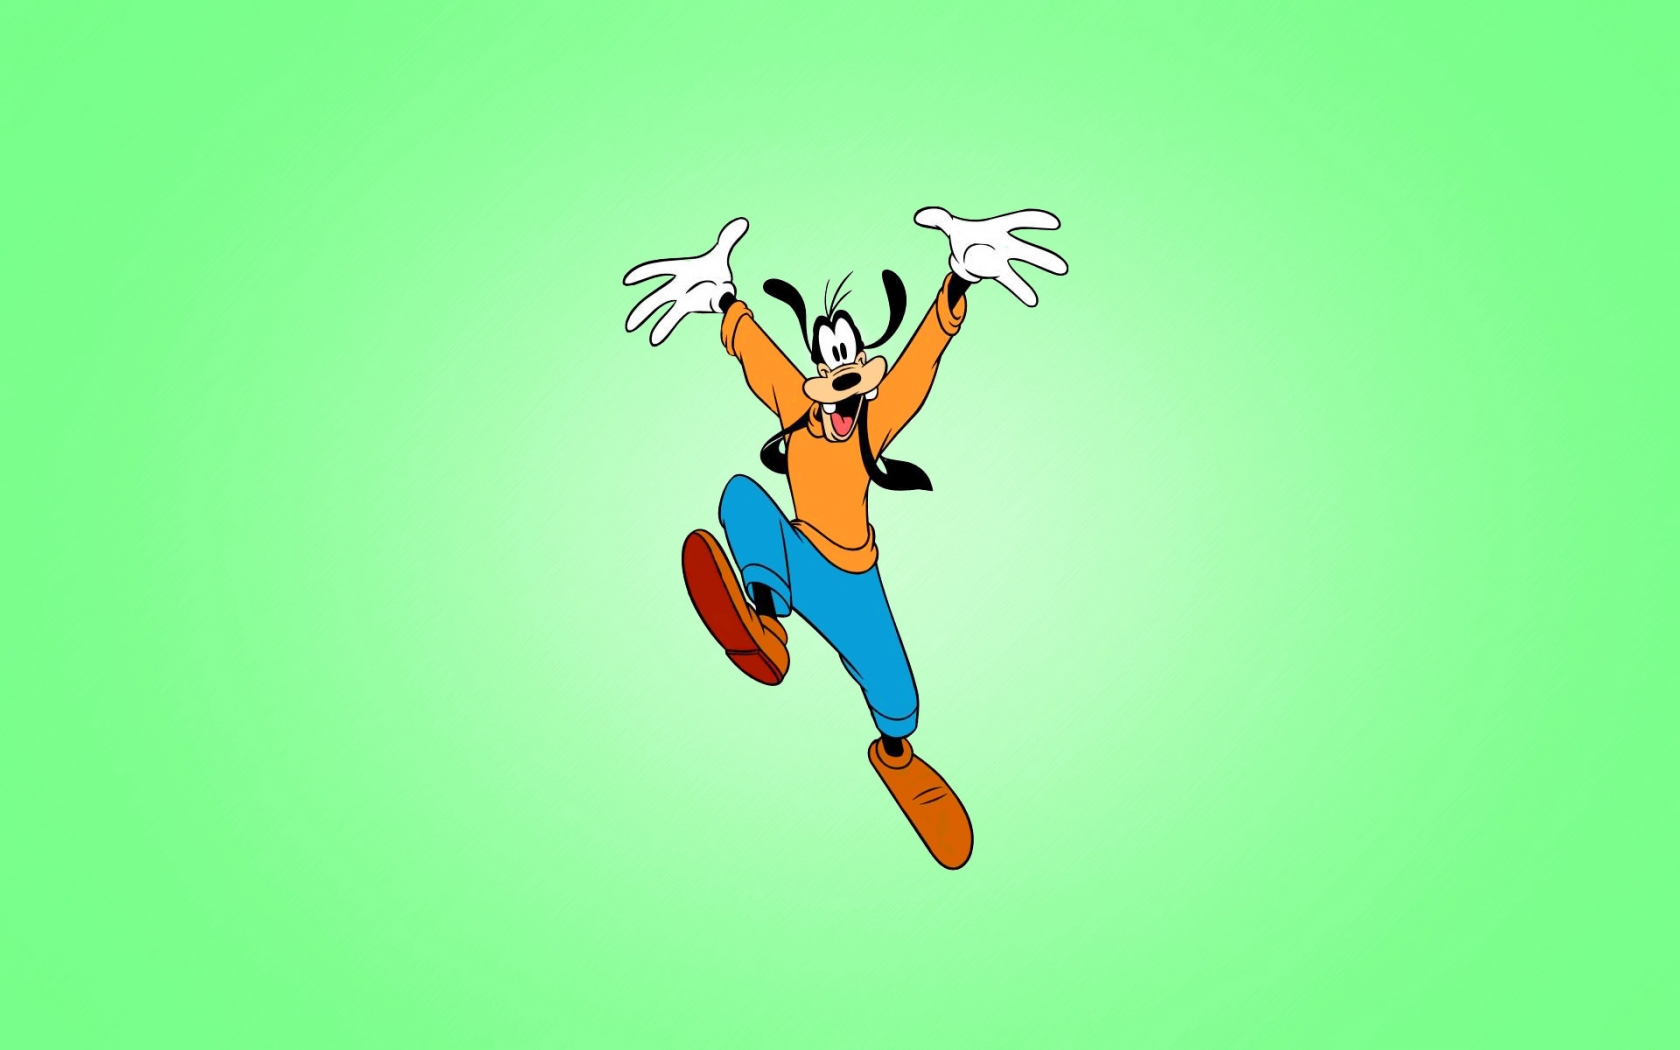 Goofy Character for 1680 x 1050 widescreen resolution